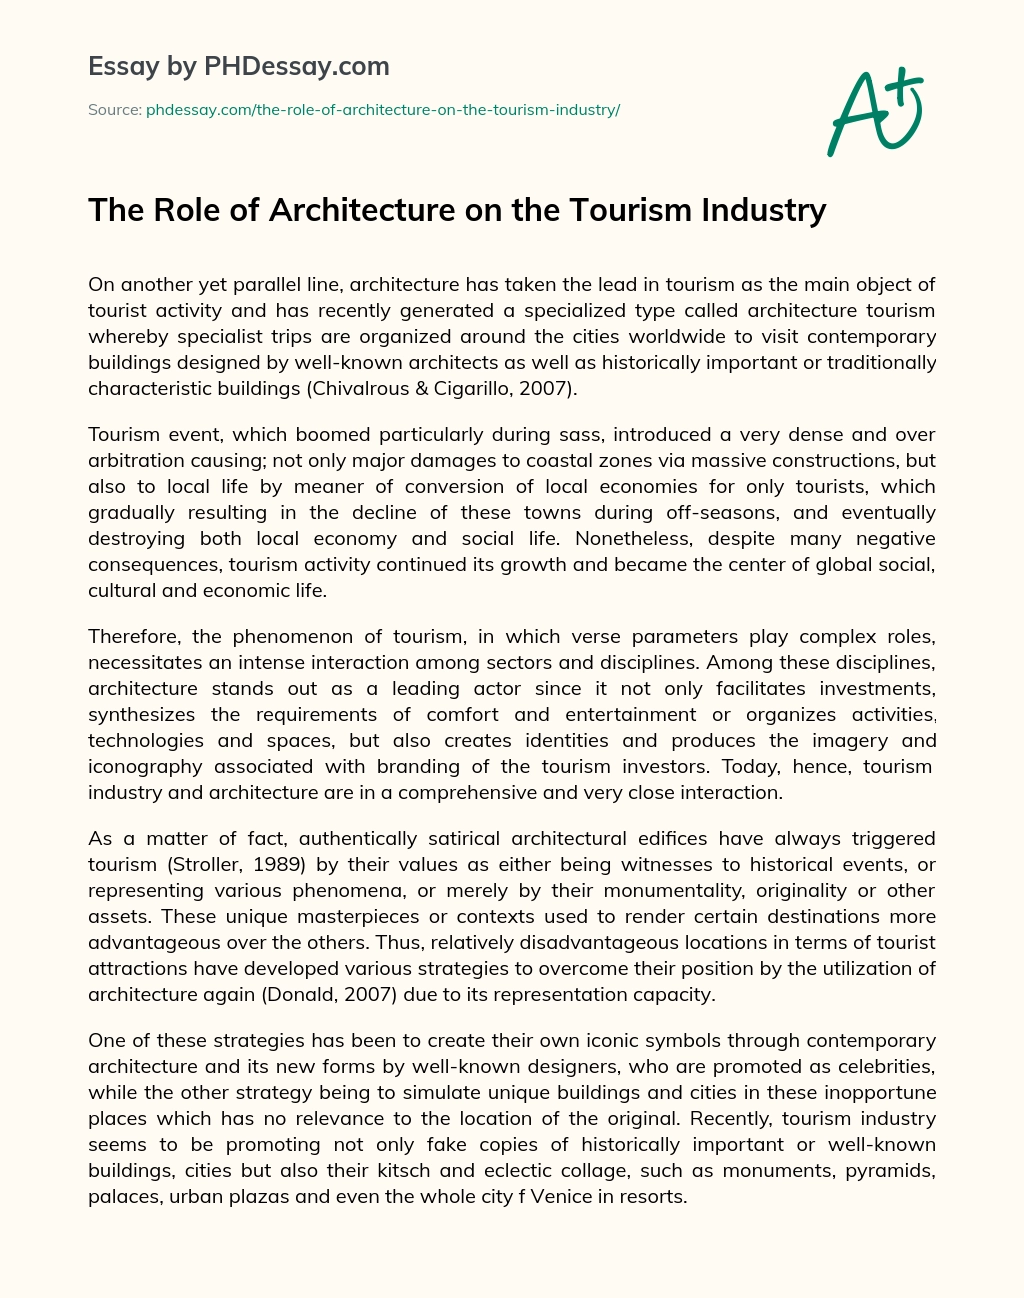 The Role of Architecture on the Tourism Industry essay